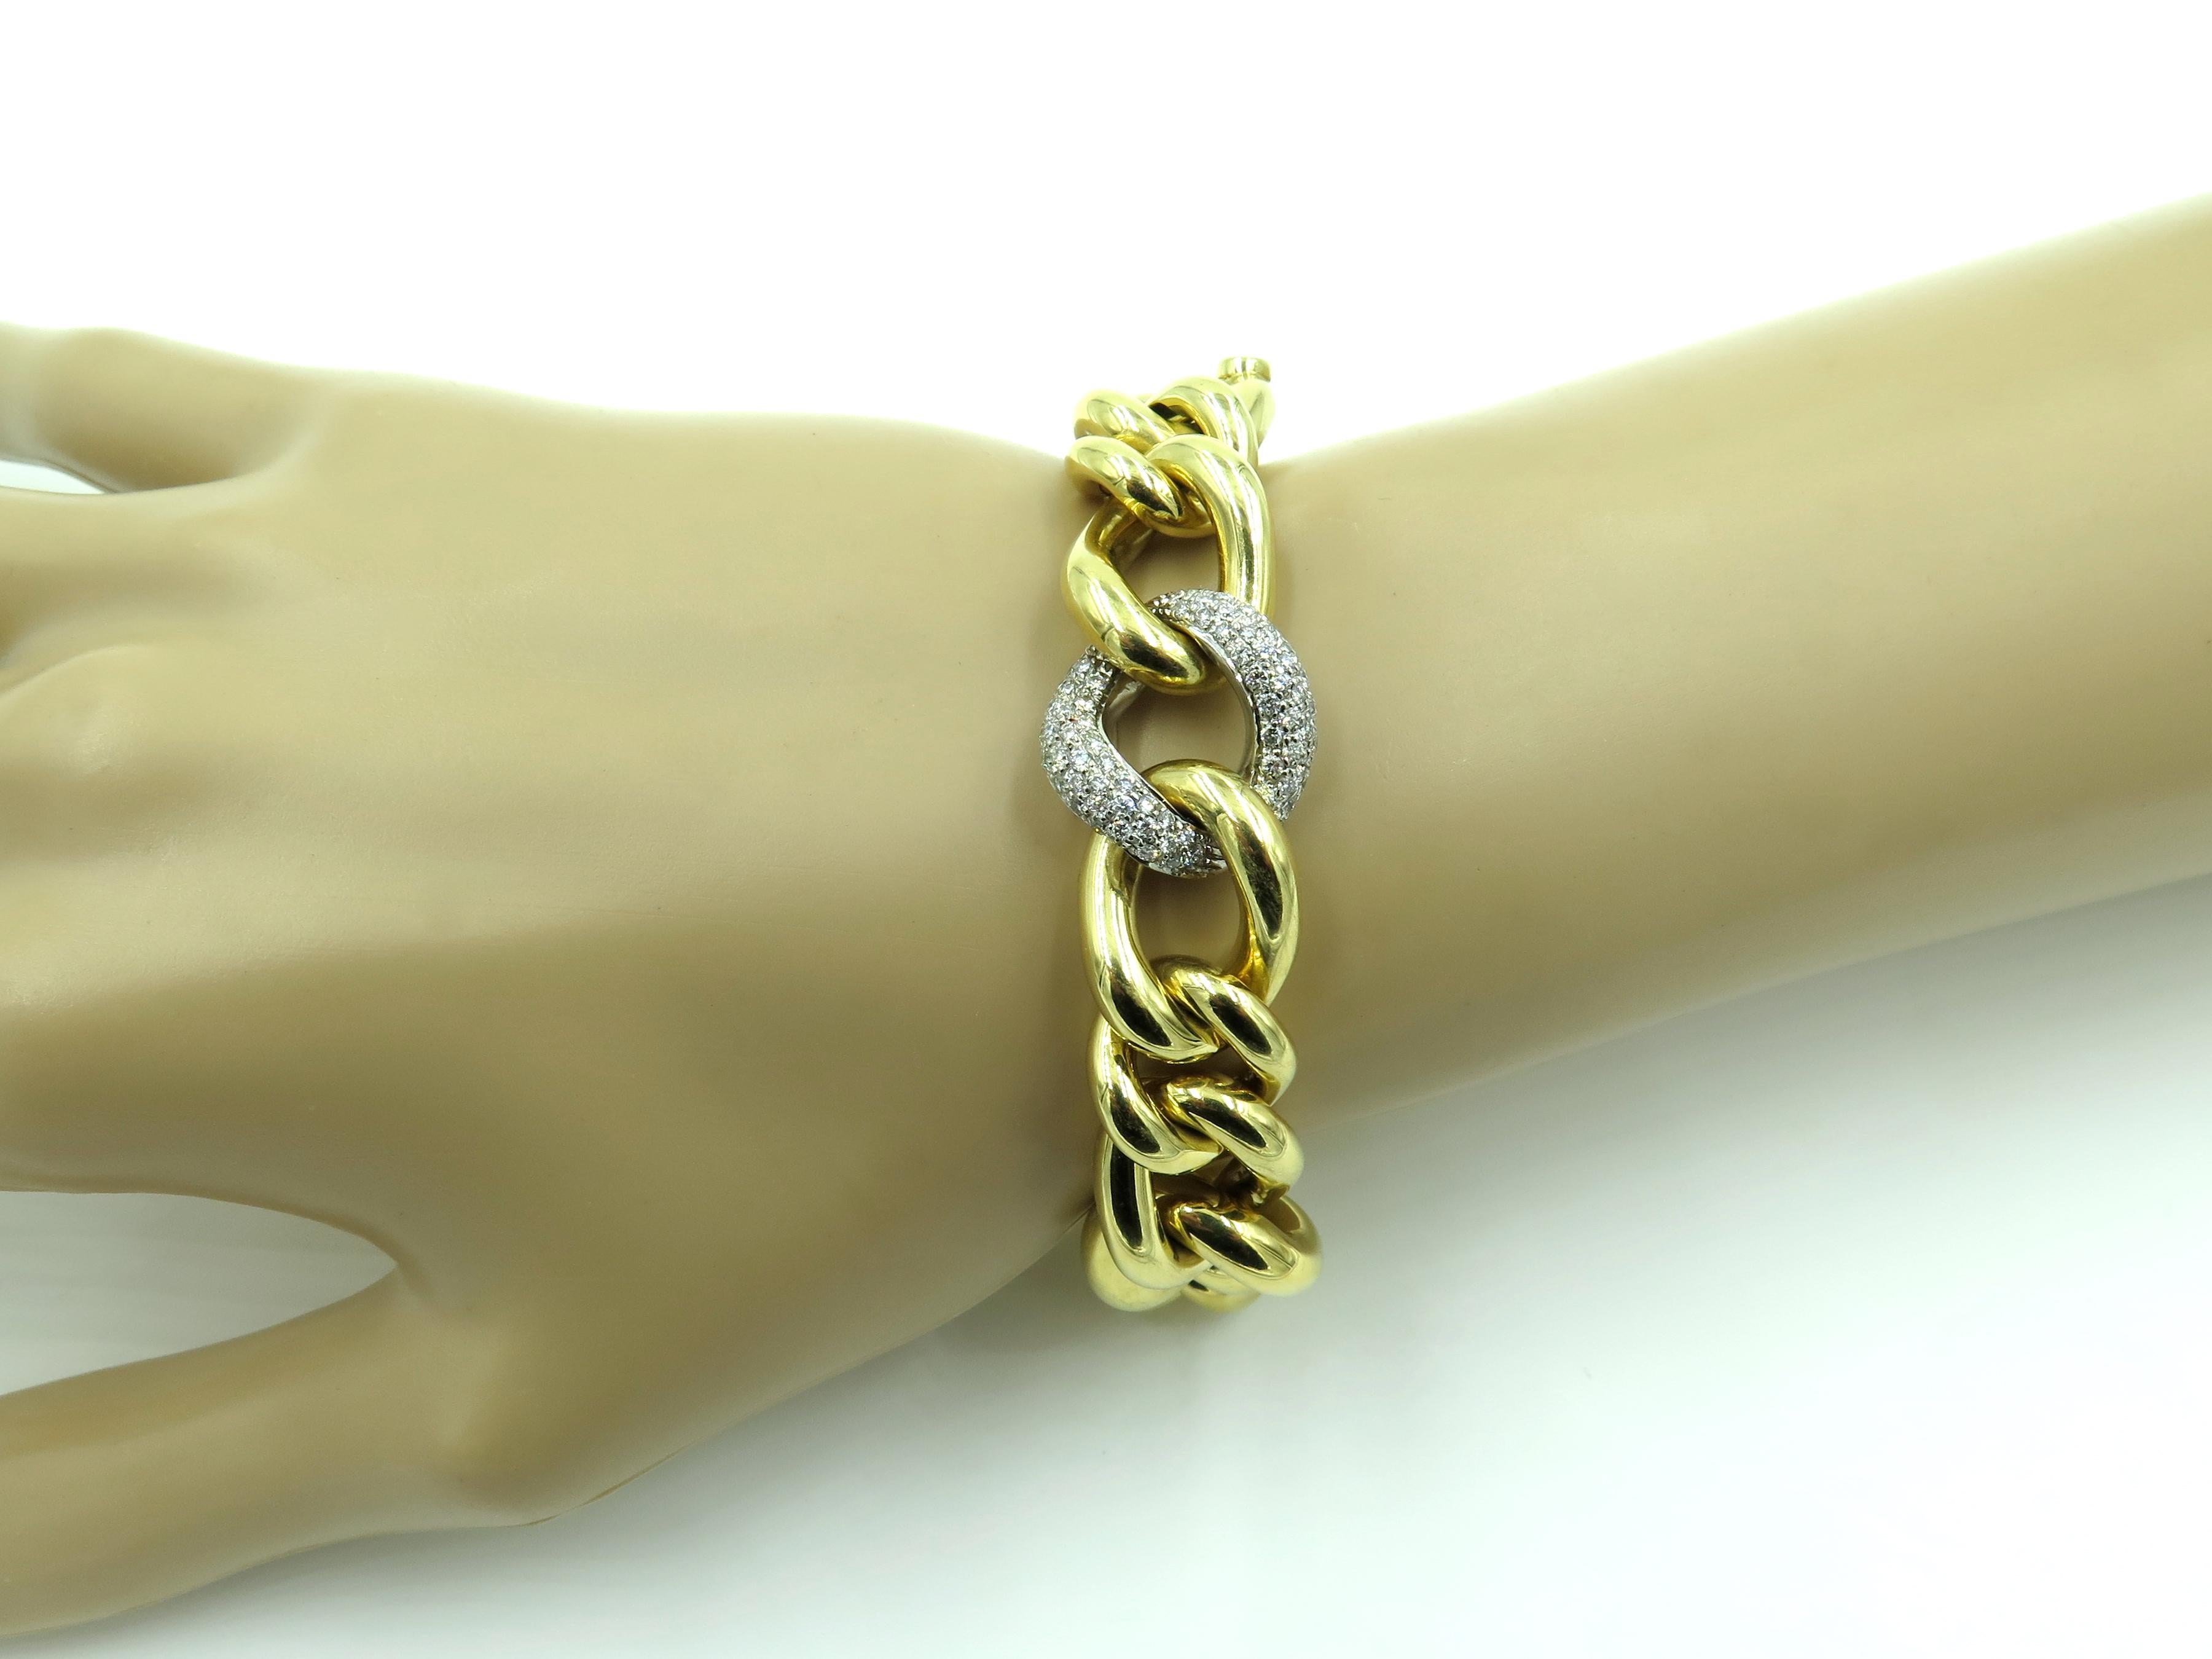 An 18 karat yellow gold, white gold and diamond bracelet. Italian. Designed as polished yellow gold curb links for various sizes, enhanced by a pave set diamond link. Seventy (70 diamonds weigh approximately 0.70 carat. Length is approximately 7 3/4